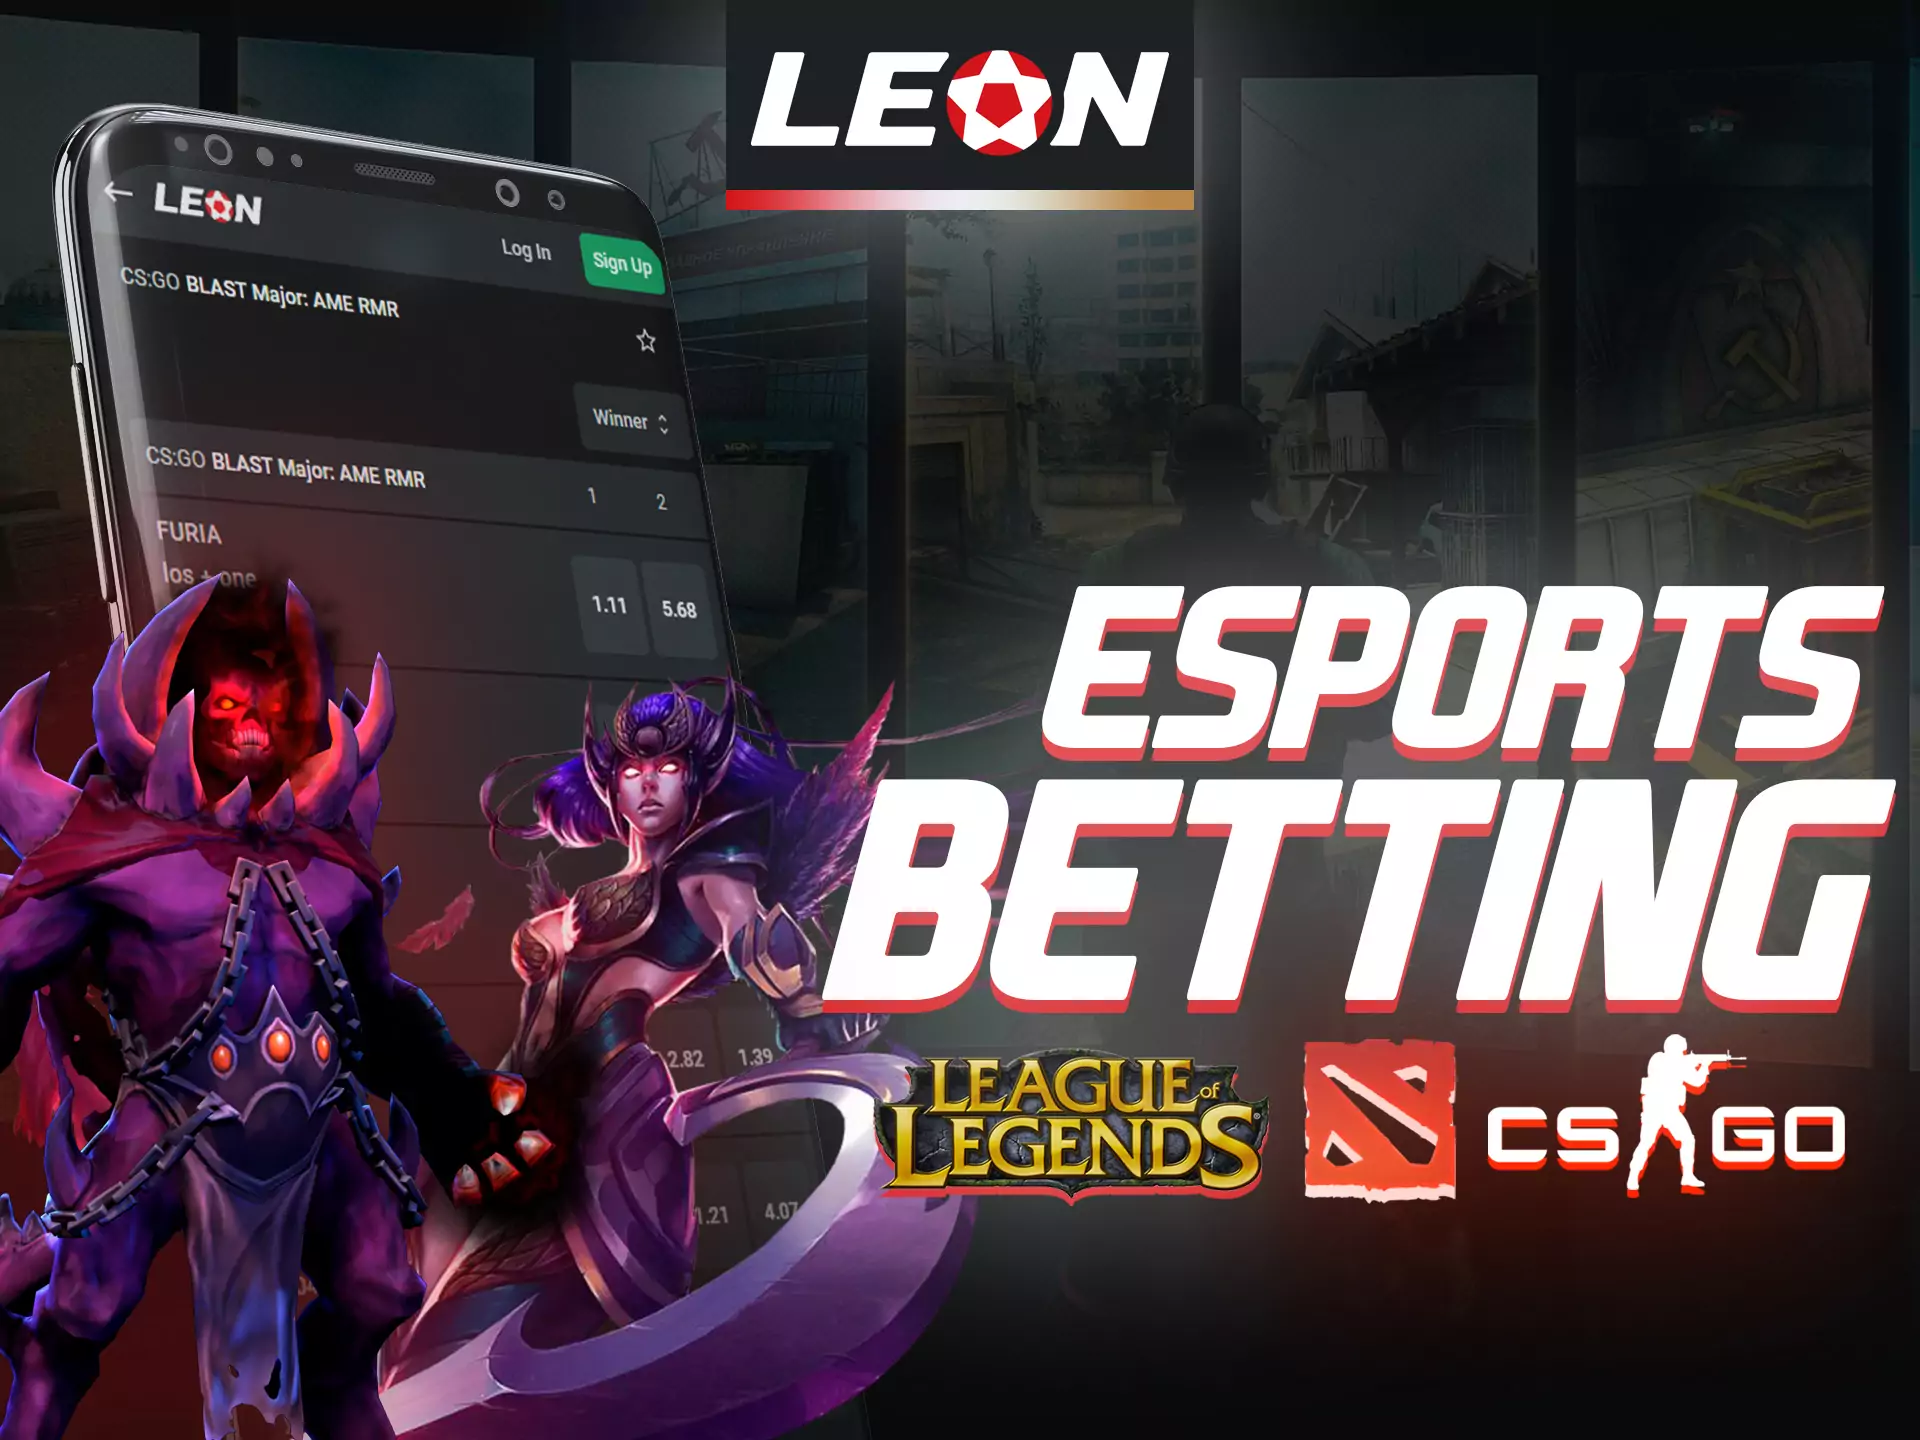 If you are a esports fan, you can bet on matches directly in the Leonbet app.